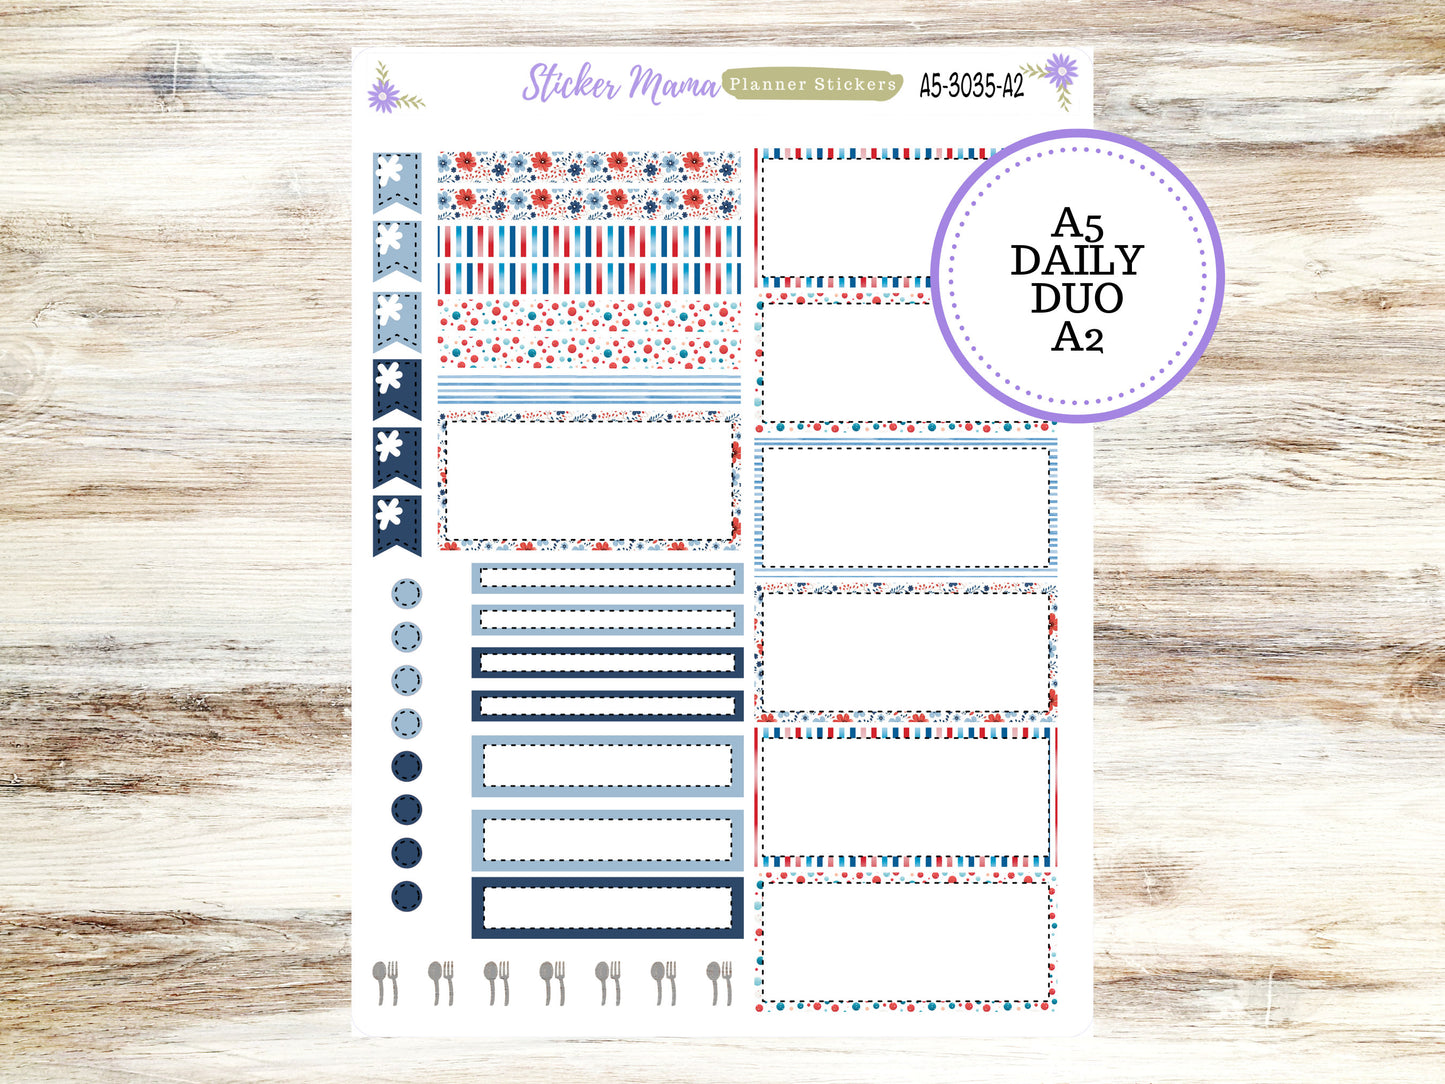 A5-DAILY DUO-Kit #3035  || American Dream Kit  || Planner Stickers - Daily Duo A5 Planner - Daily Duo Stickers - Daily Planner